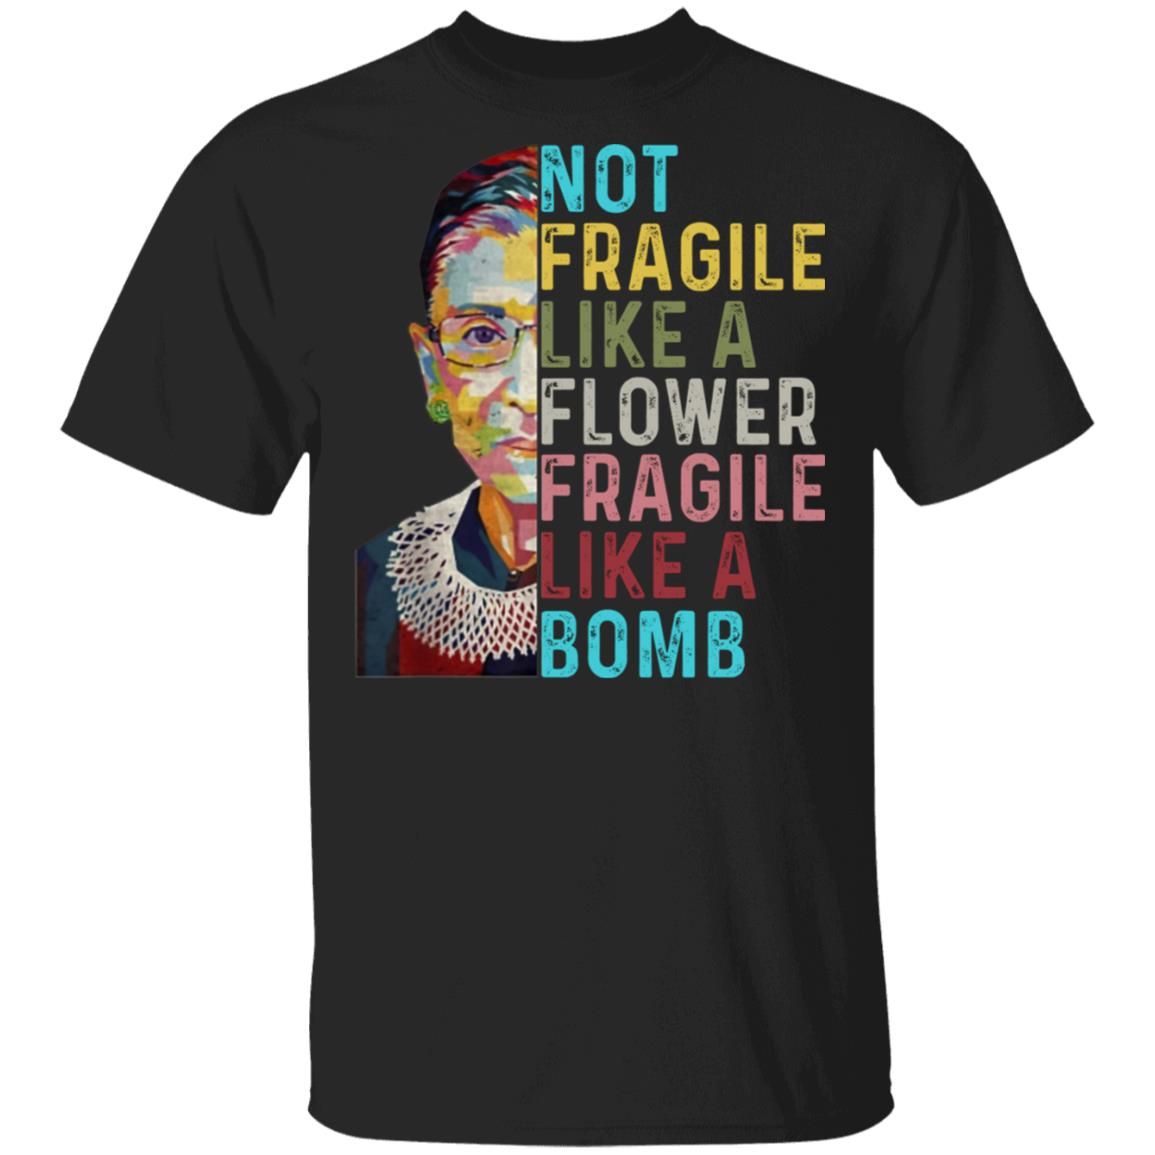 Not Fragile Like A Flower But A Bomb Ruth Ginsburg Rbg Graphic Tee Shirt Style: Gildan Ultra Cotton T-Shirt, Color: Black